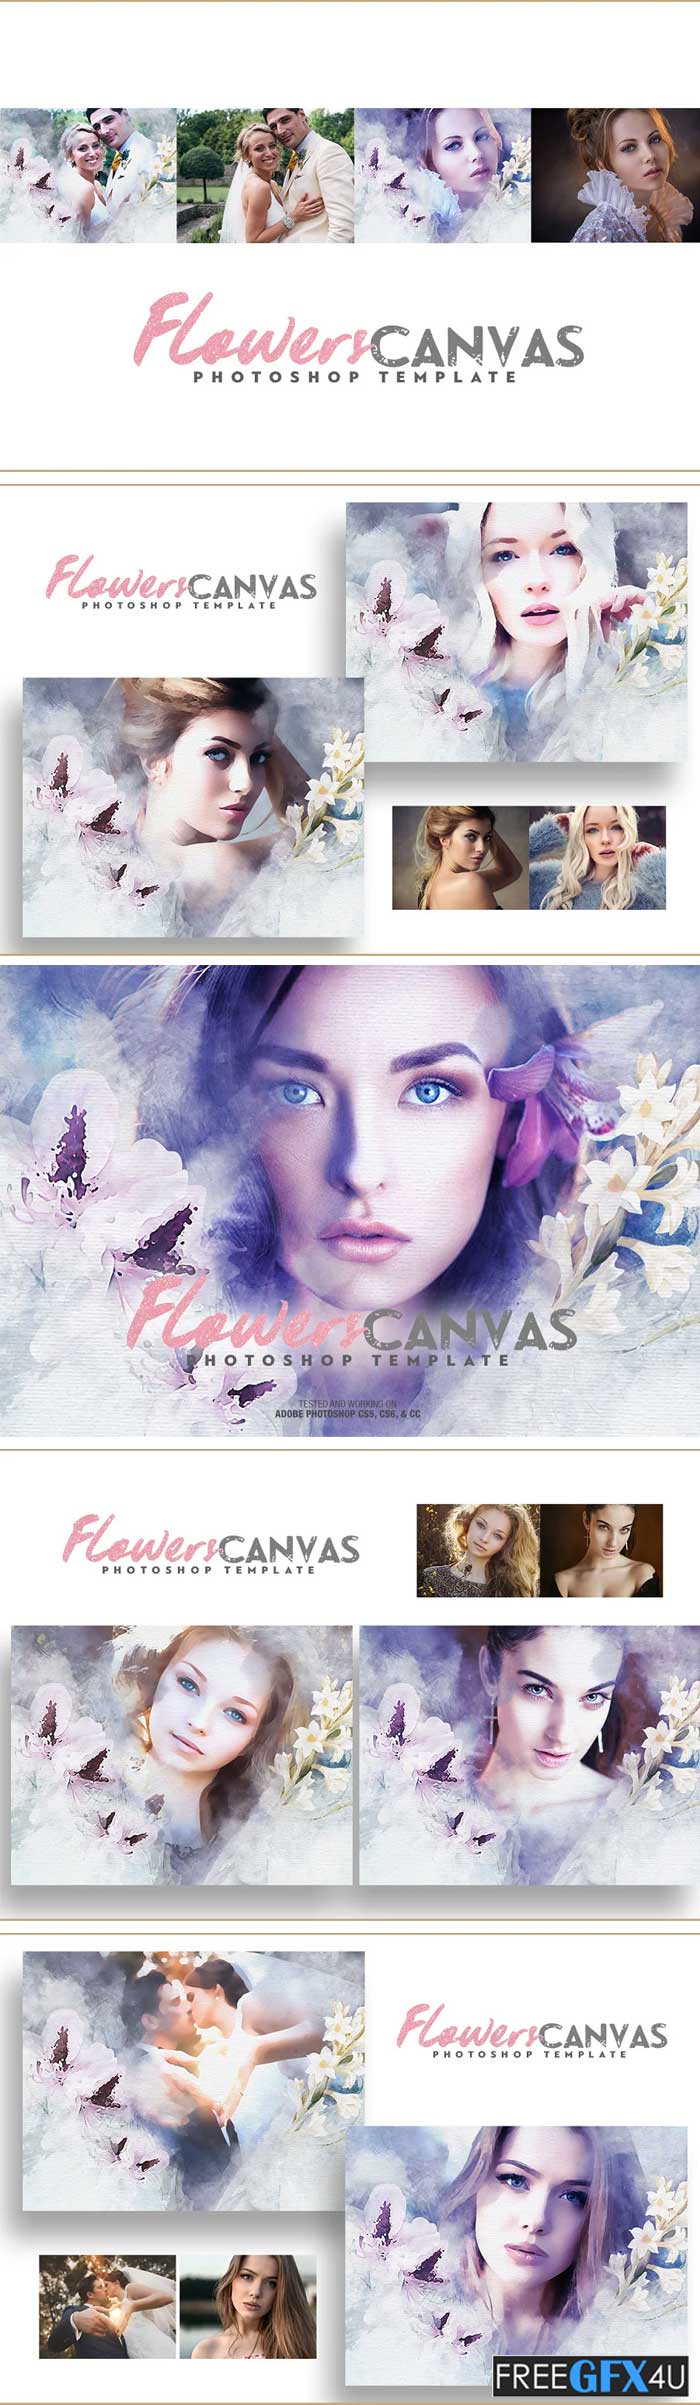 Flowers Canvas Photo Template